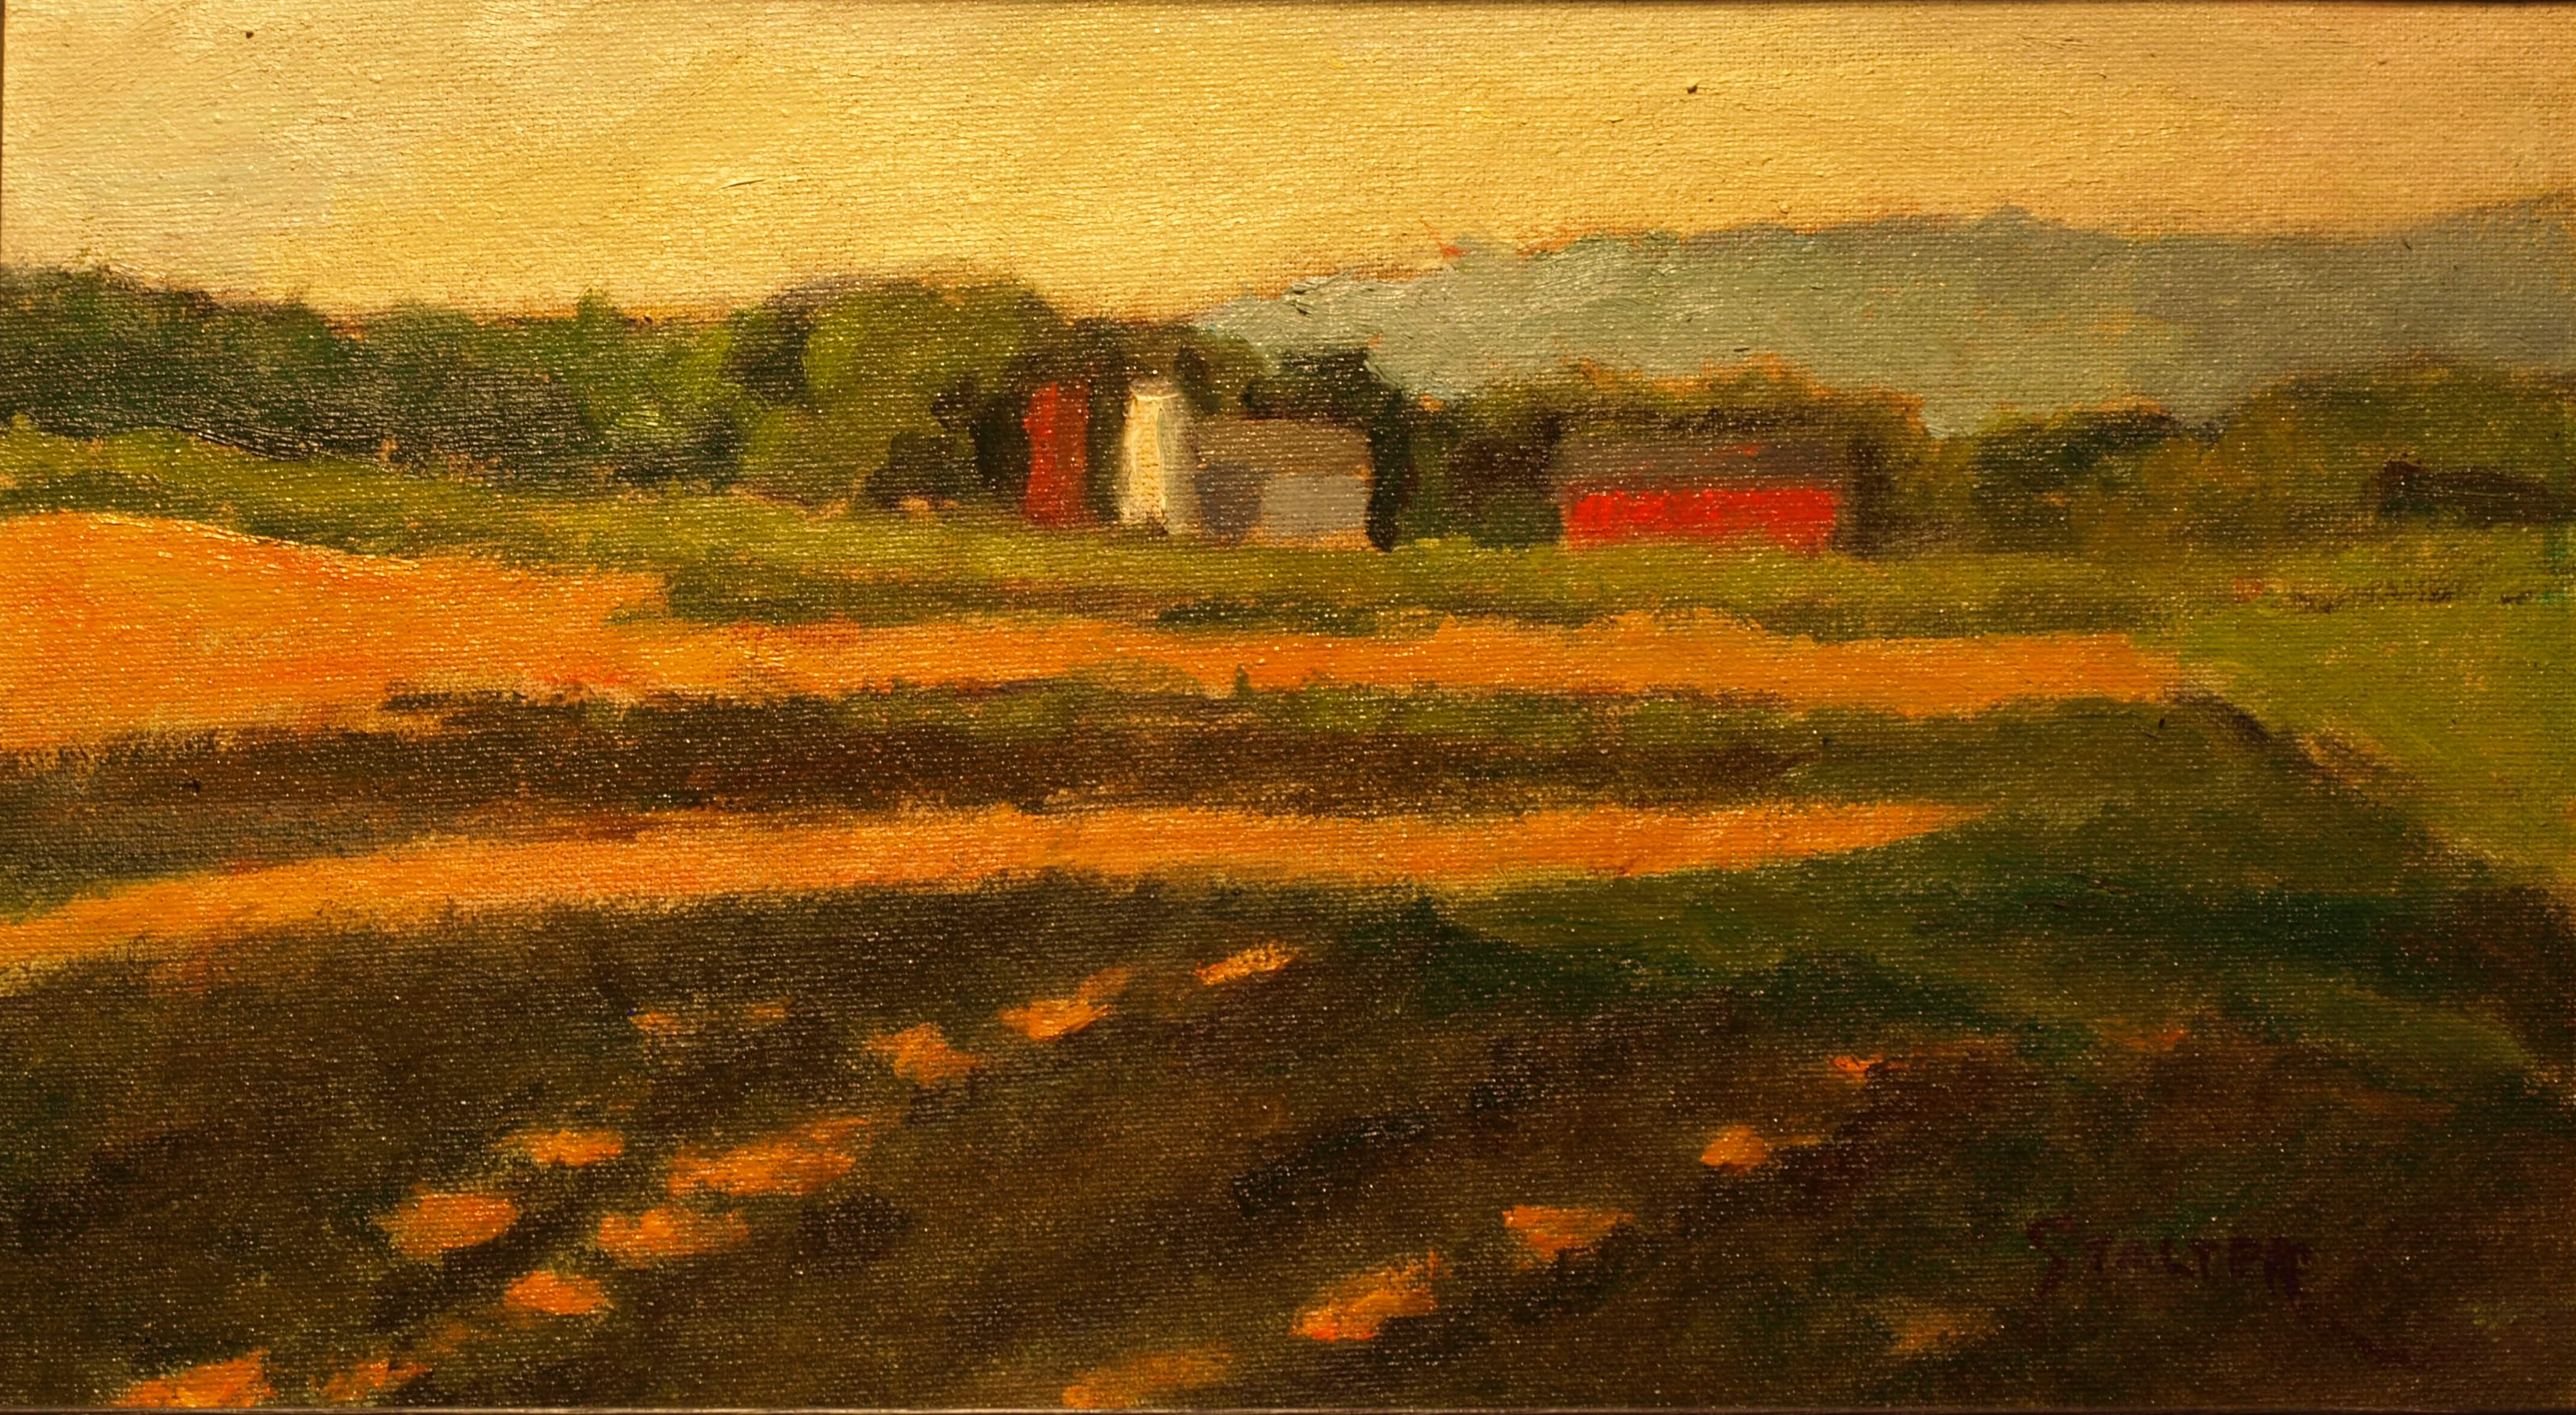 Late Afternoon Light, Oil on Canvas on Panel, 8 x 14 Inches, by Richard Stalter, $225